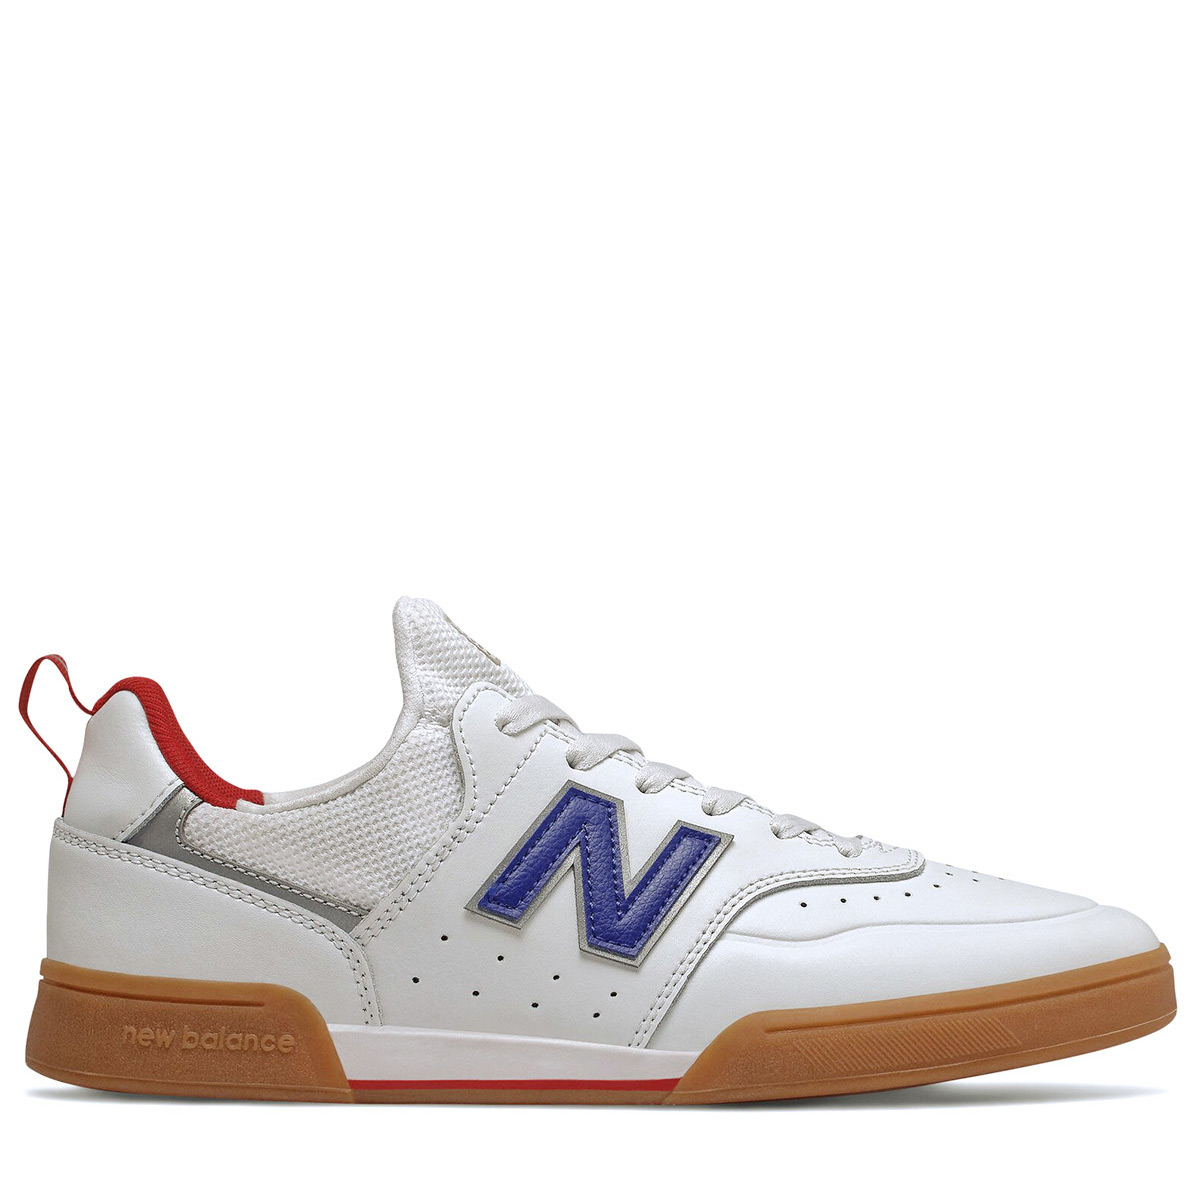 Chaussures Baskets New Balance homme 288 SWG taille Blanc Blanche ...